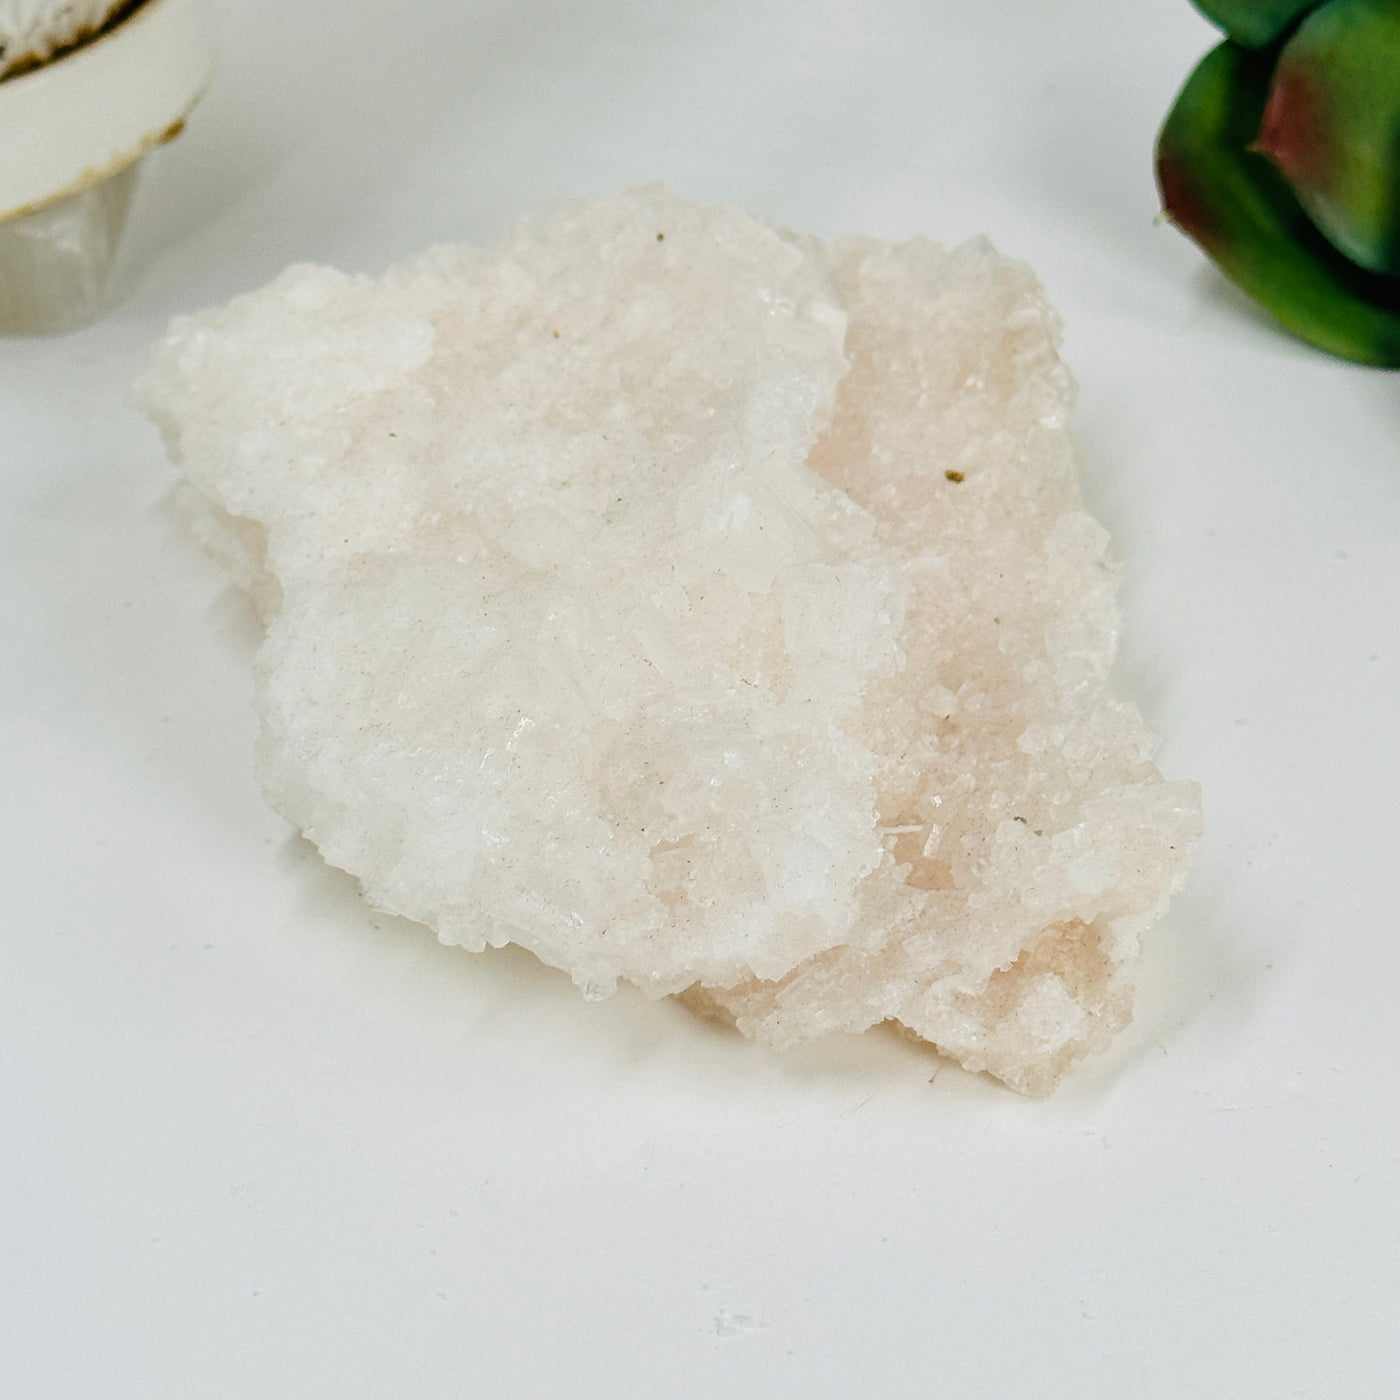 Halite freeform with decorations in the background